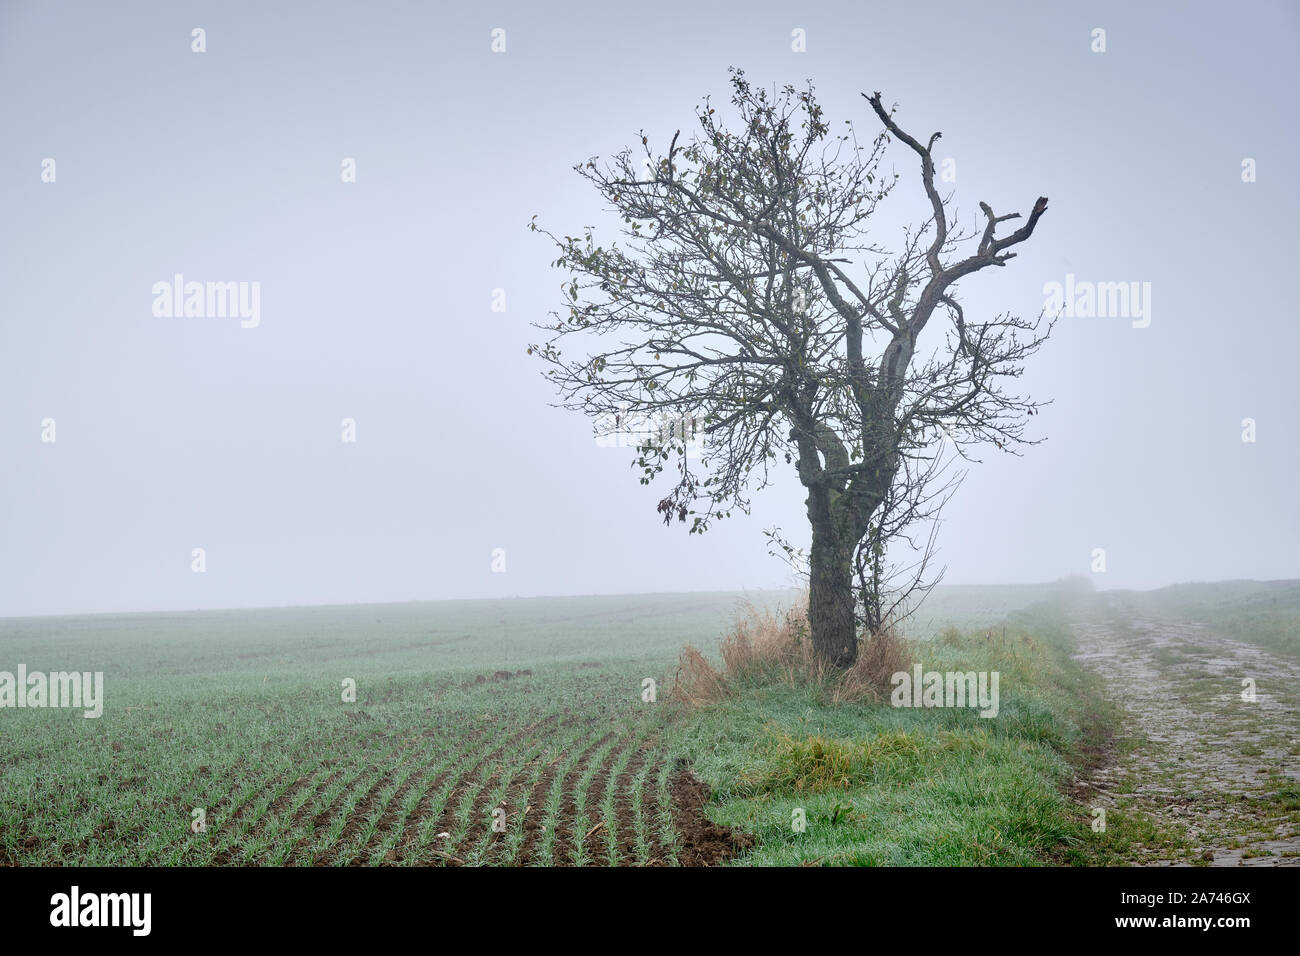 Moody foggy autumn landscape with agricultural fields and a decaying overgrown path leading into the white fog to a single bare tree. Seen in Germany, Stock Photo